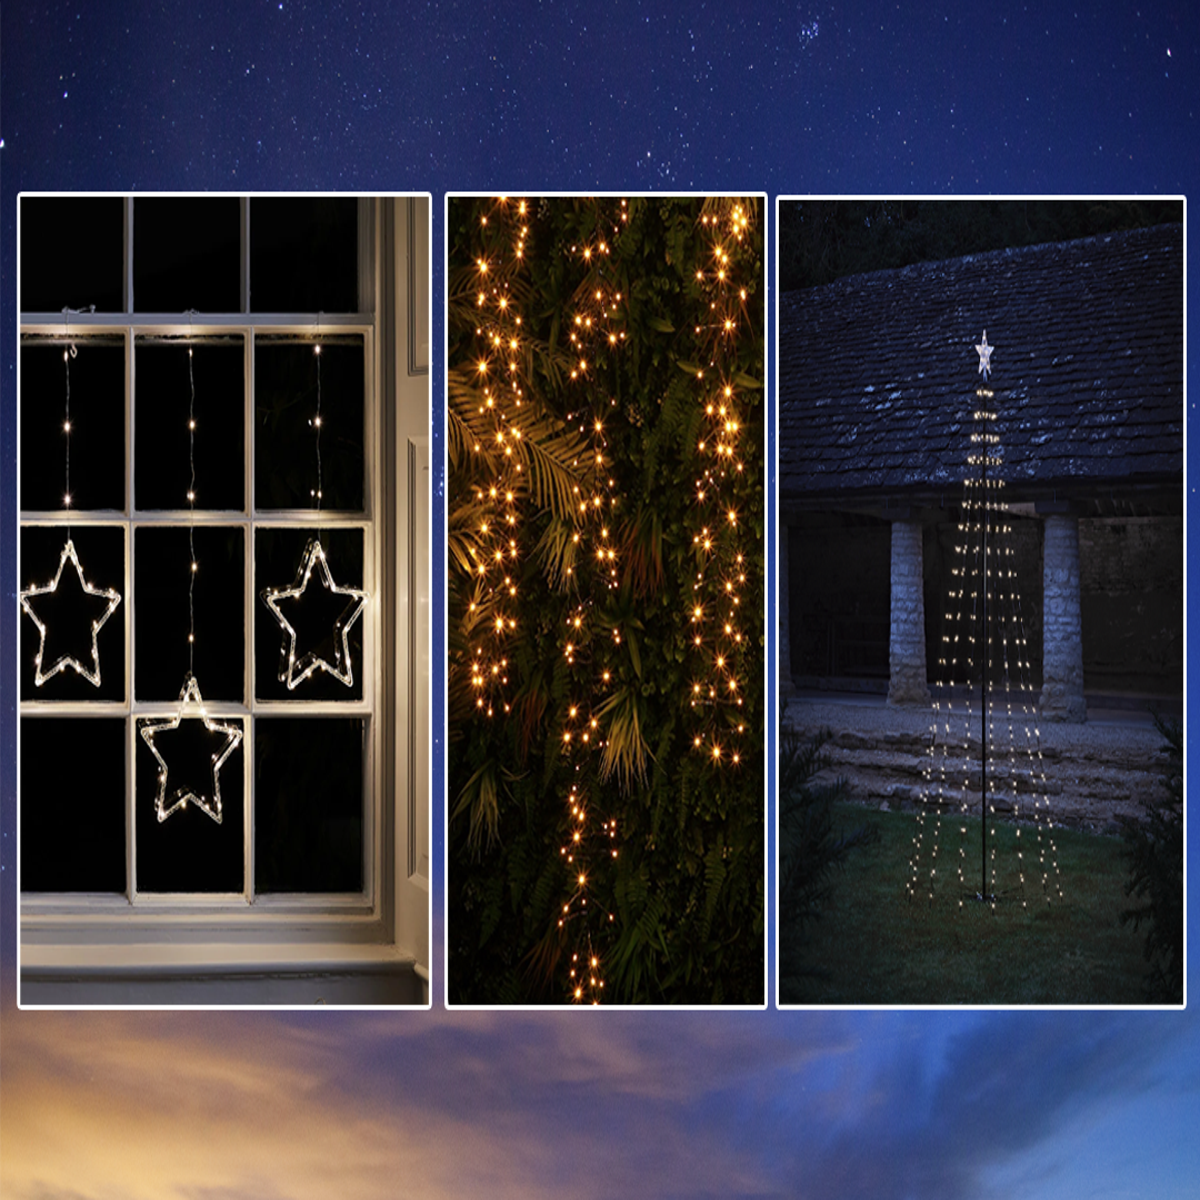 https://static.independent.co.uk/2023/08/25/16/Christmas%20lights.png?width=1200&height=1200&fit=crop